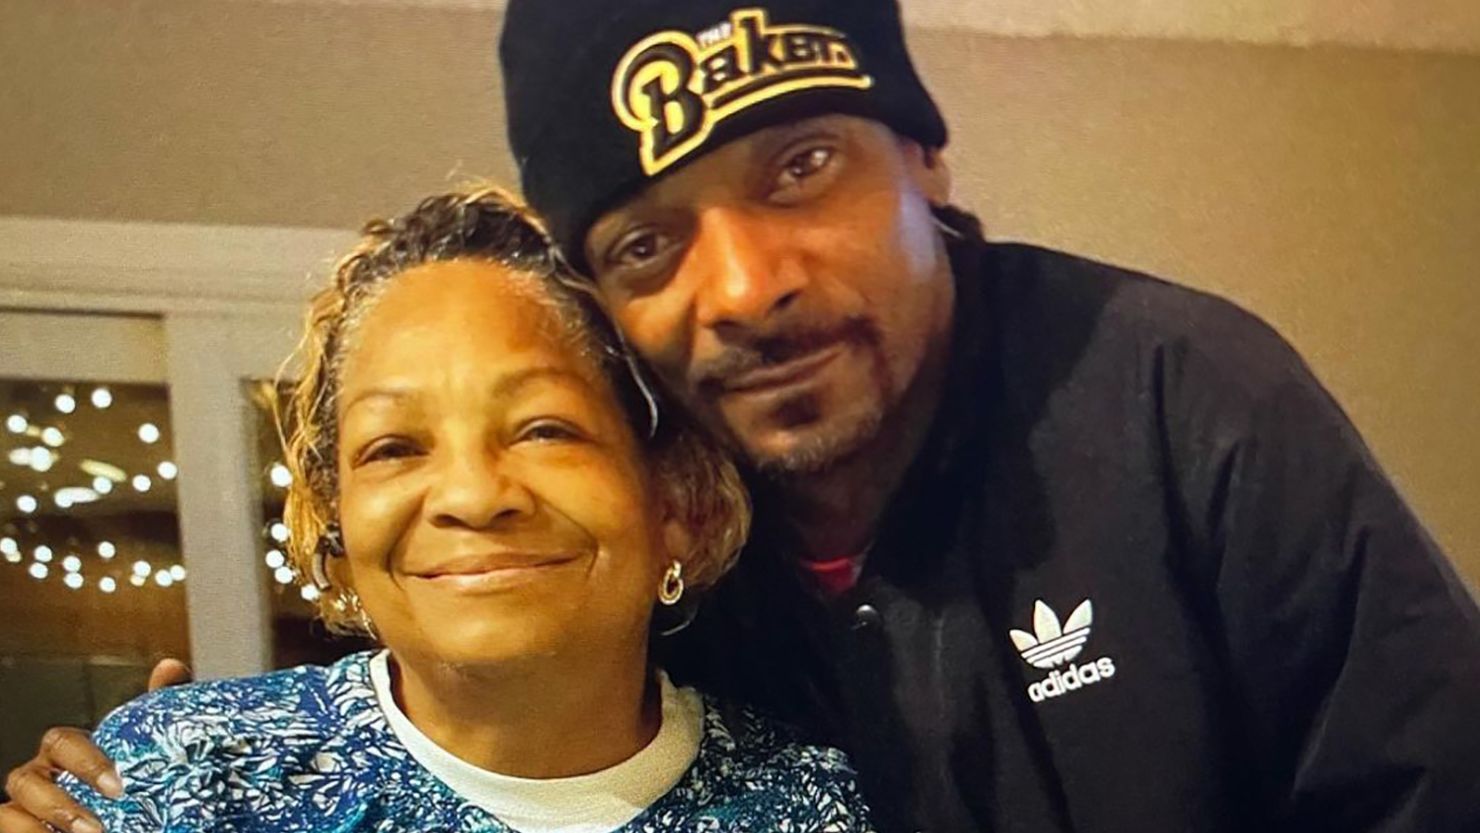 Snoop Dogg shared a photo of himself and his mom to Instagram with the caption, "Mama thank u for having me."